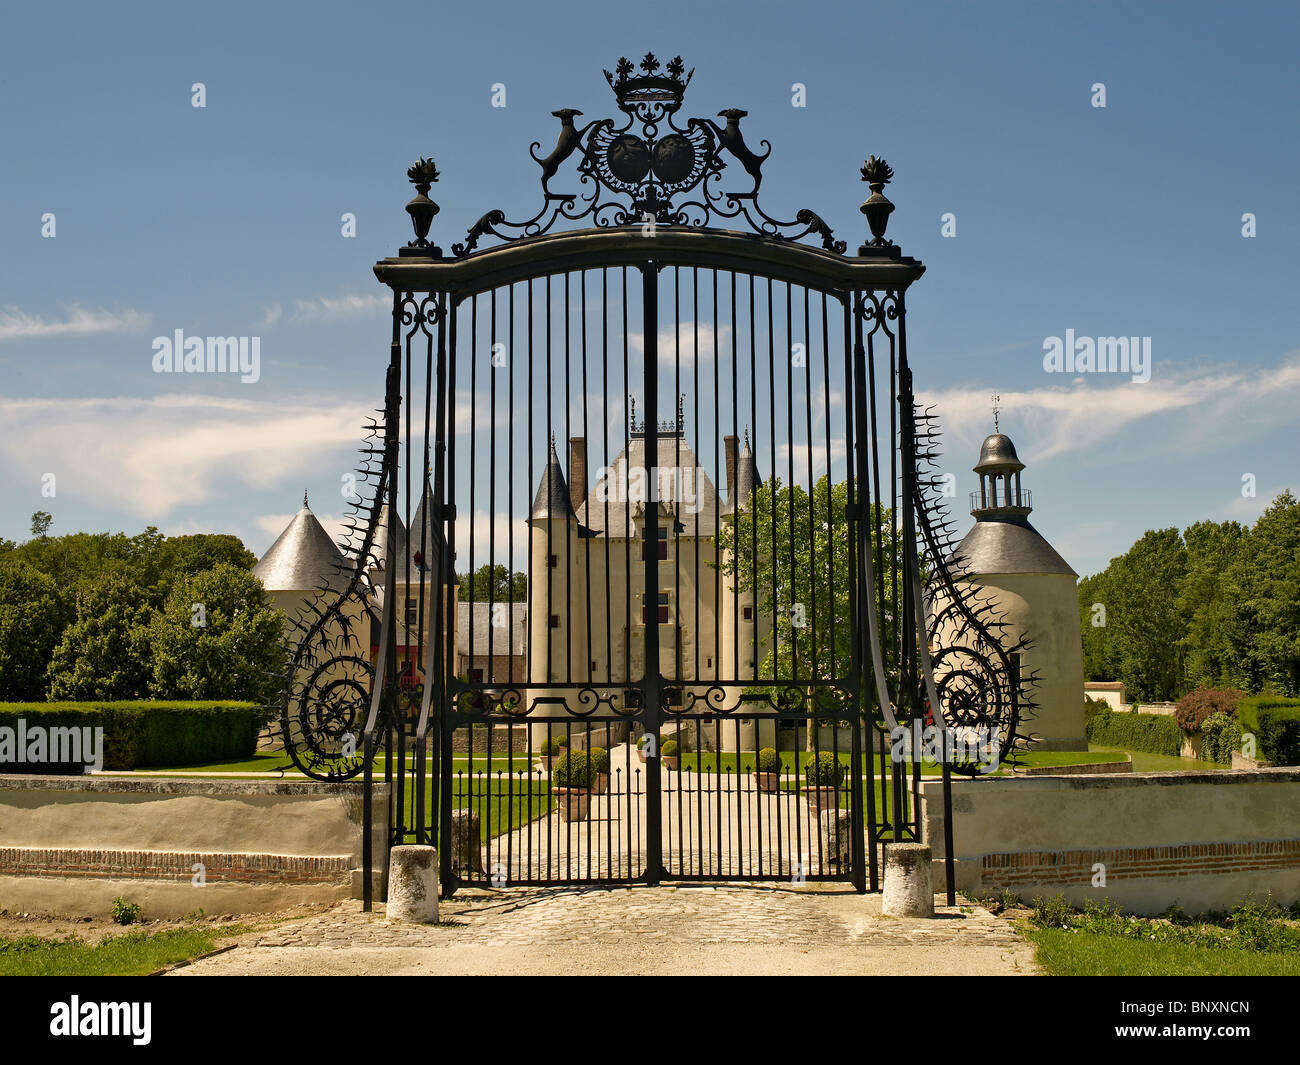 A view of the impressive Gates at the original enterance to the Chateau at Chamerolles Stock Photo